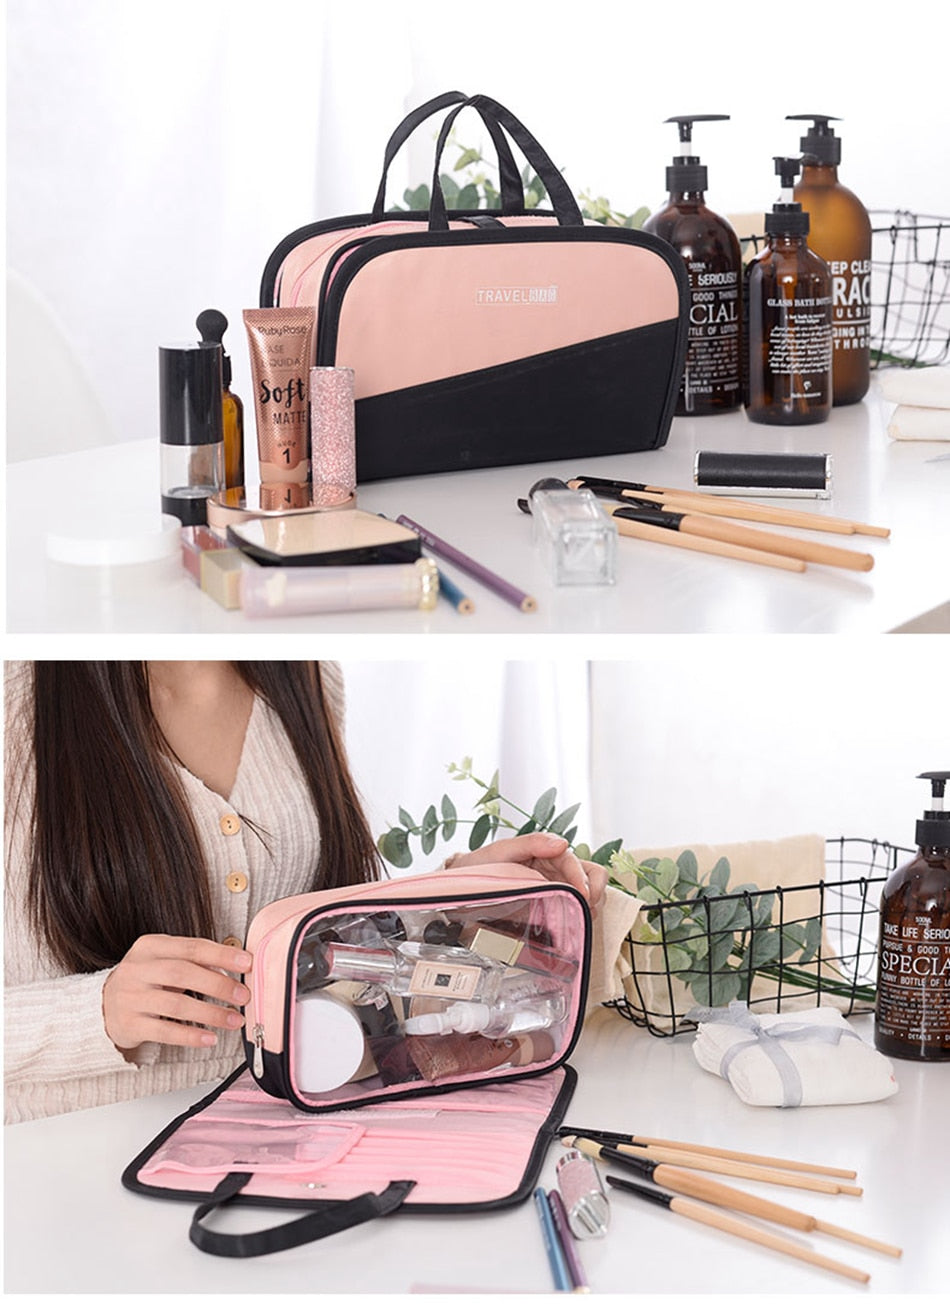 DoubleTrouBag | Two-Layered Water Resistant Toiletry & Cosmetic Bag - Solutiverse